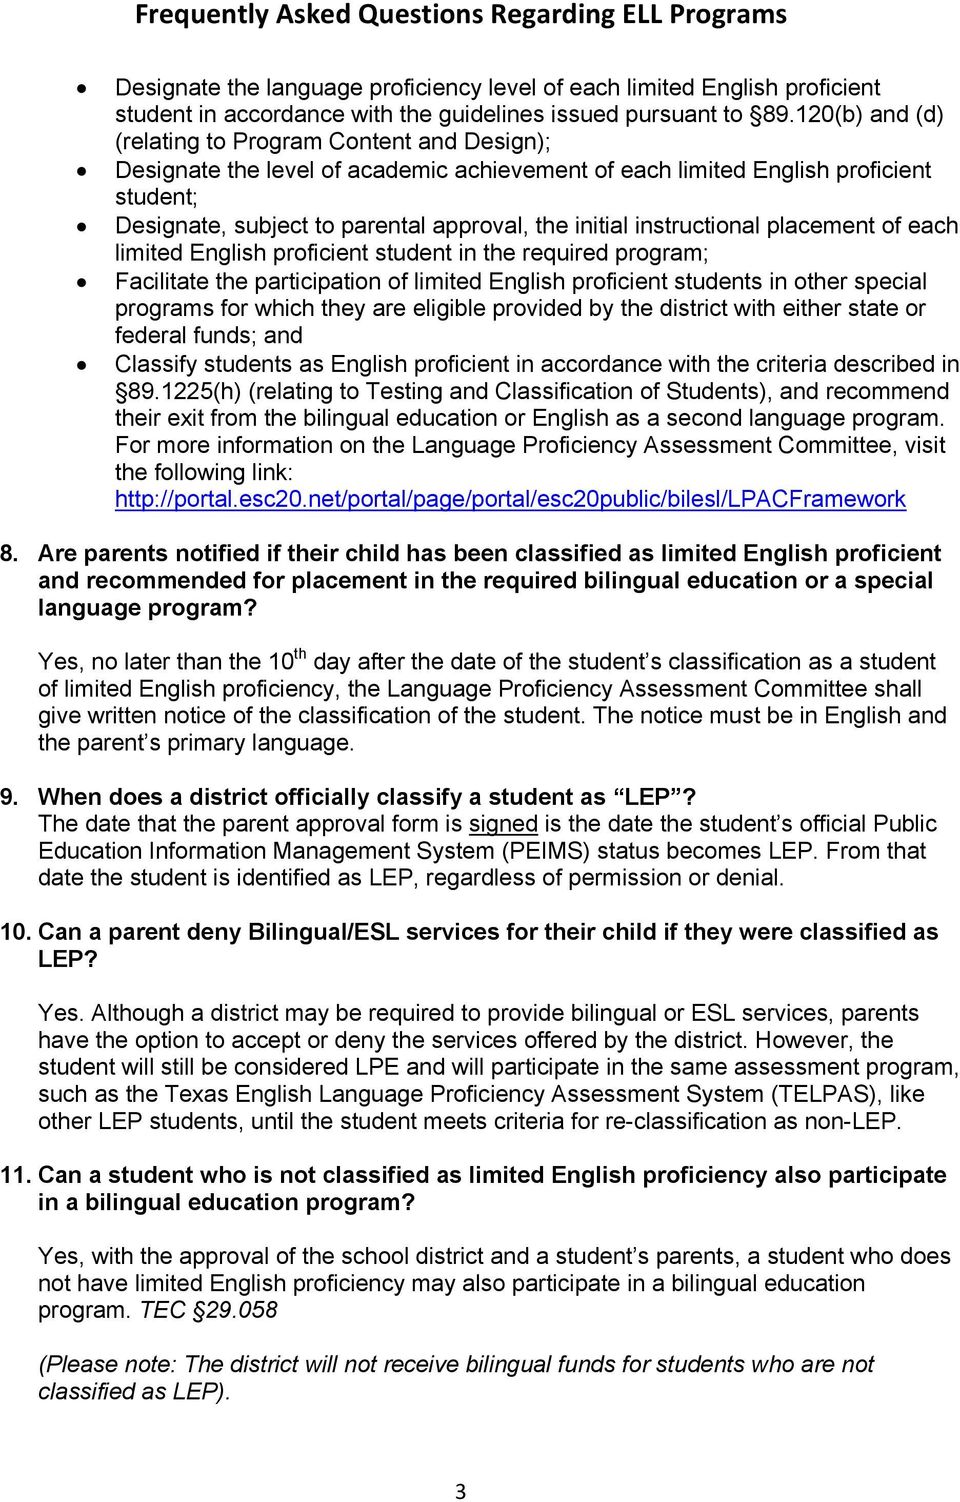 instructional placement of each limited English proficient student in the required program; Facilitate the participation of limited English proficient students in other special programs for which